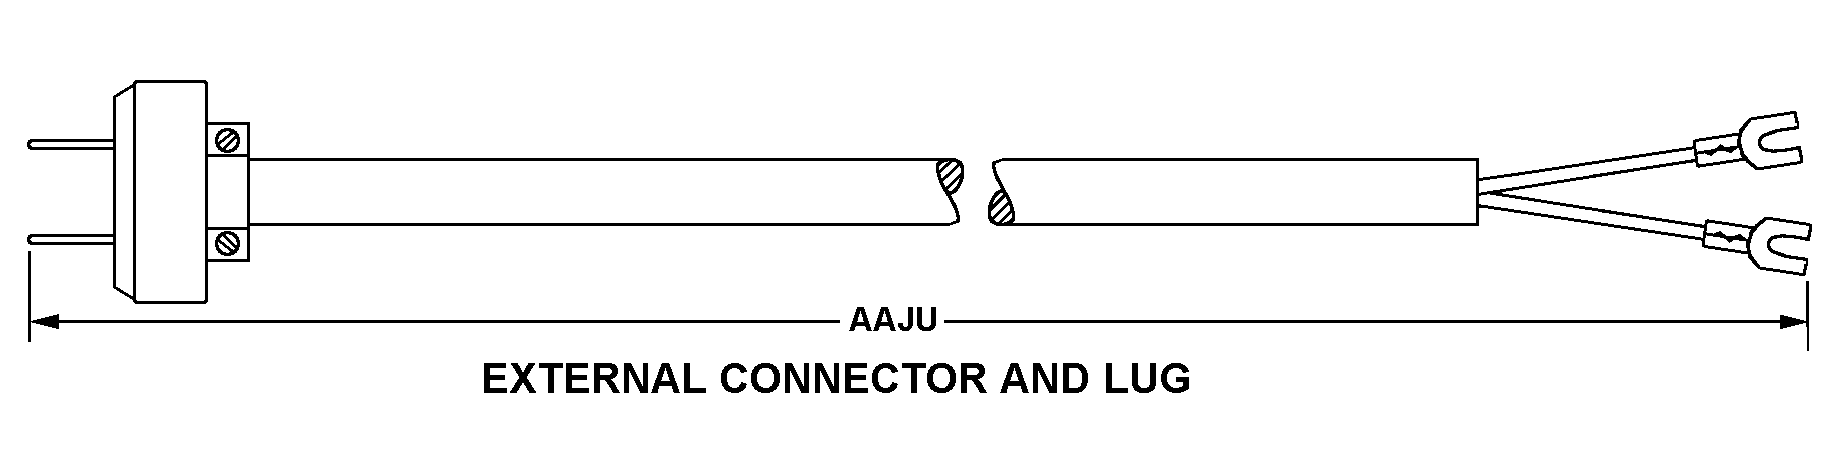 EXTERNAL CONNECTOR AND LUG style nsn 5995-01-374-4607